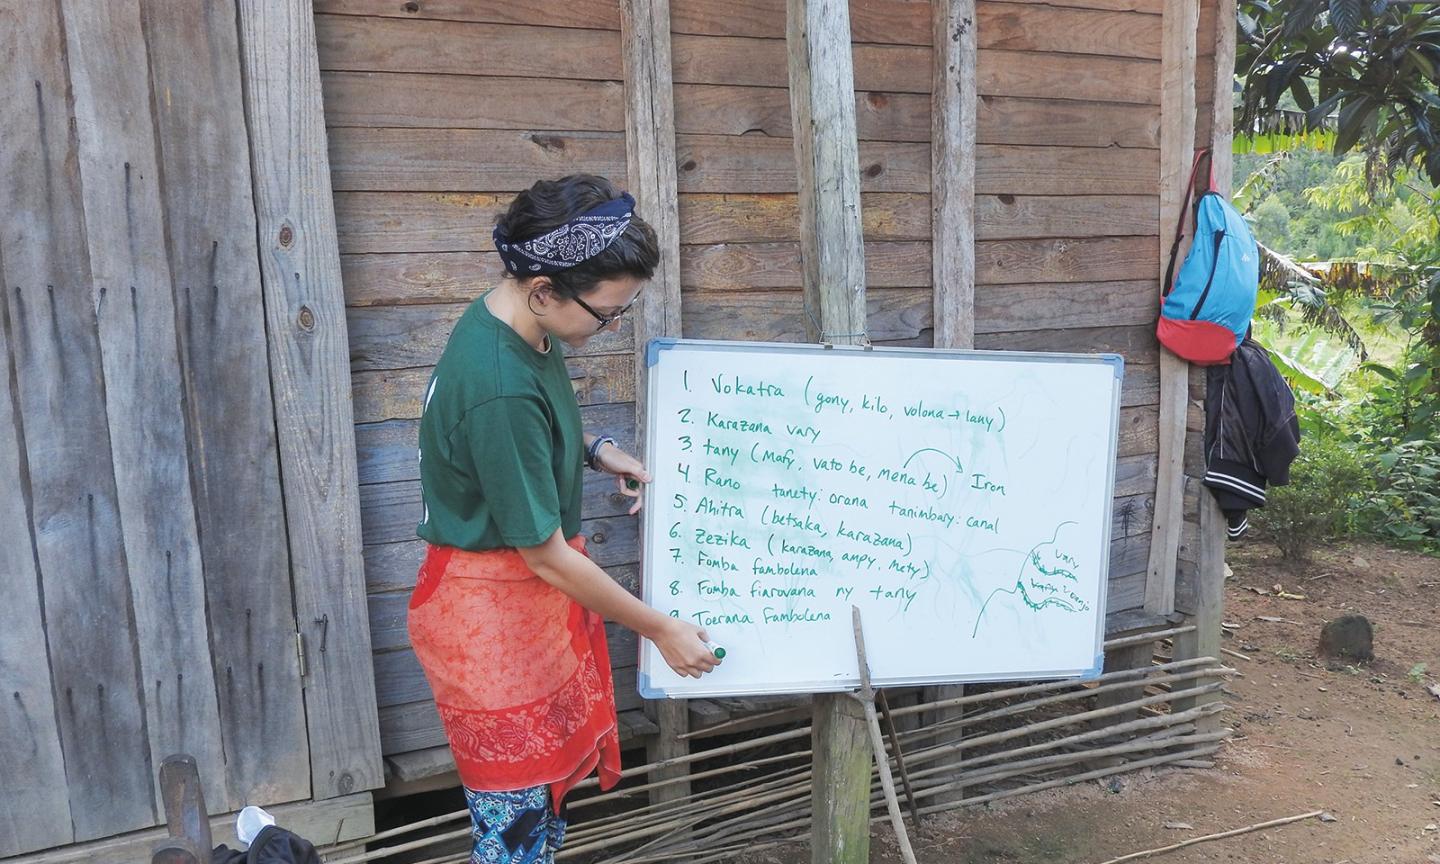 Karie Whitman guiding a focus group on rice agriculture (in Malagasy) in a village near Maromizaha Forest;